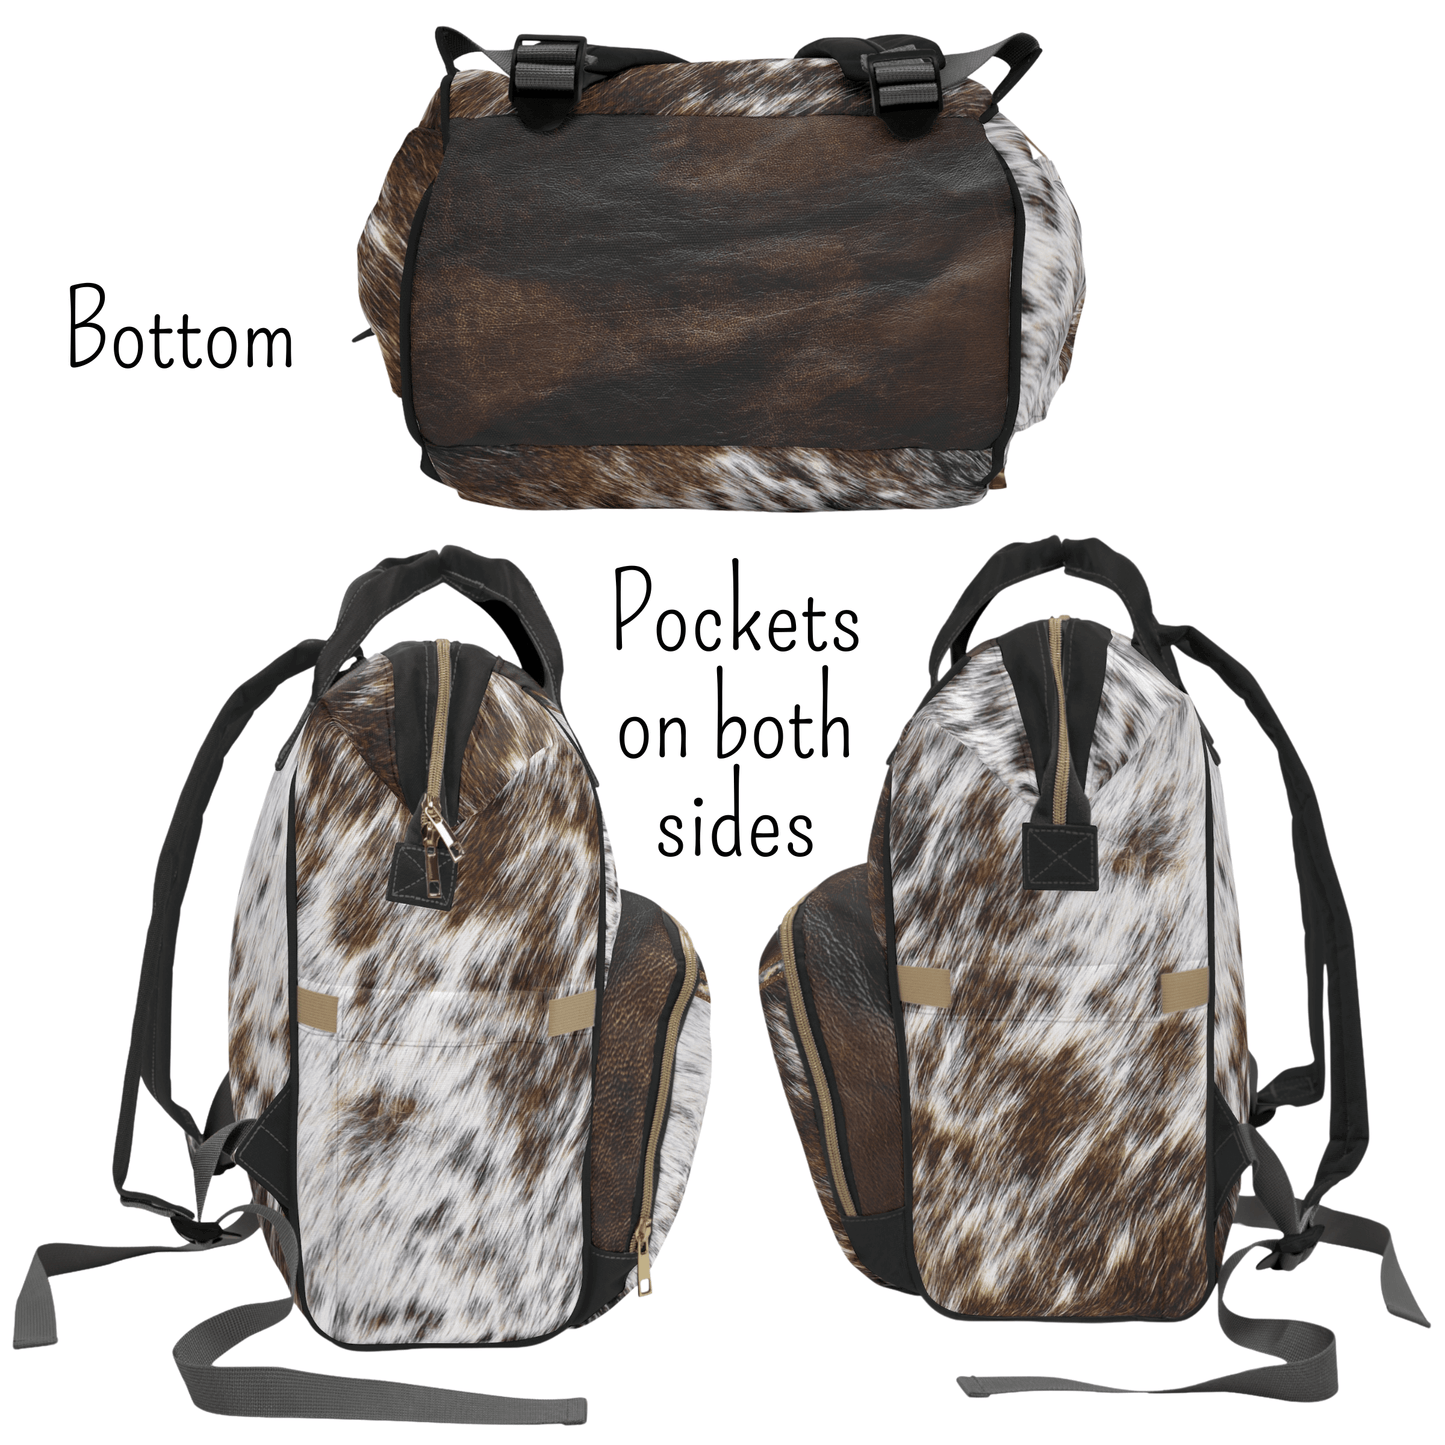 The bottom of the backpack is dark brown printed leather and the exterior sides show a combination of brown cowhide print and faux leather with large side pockets for large water bottles.